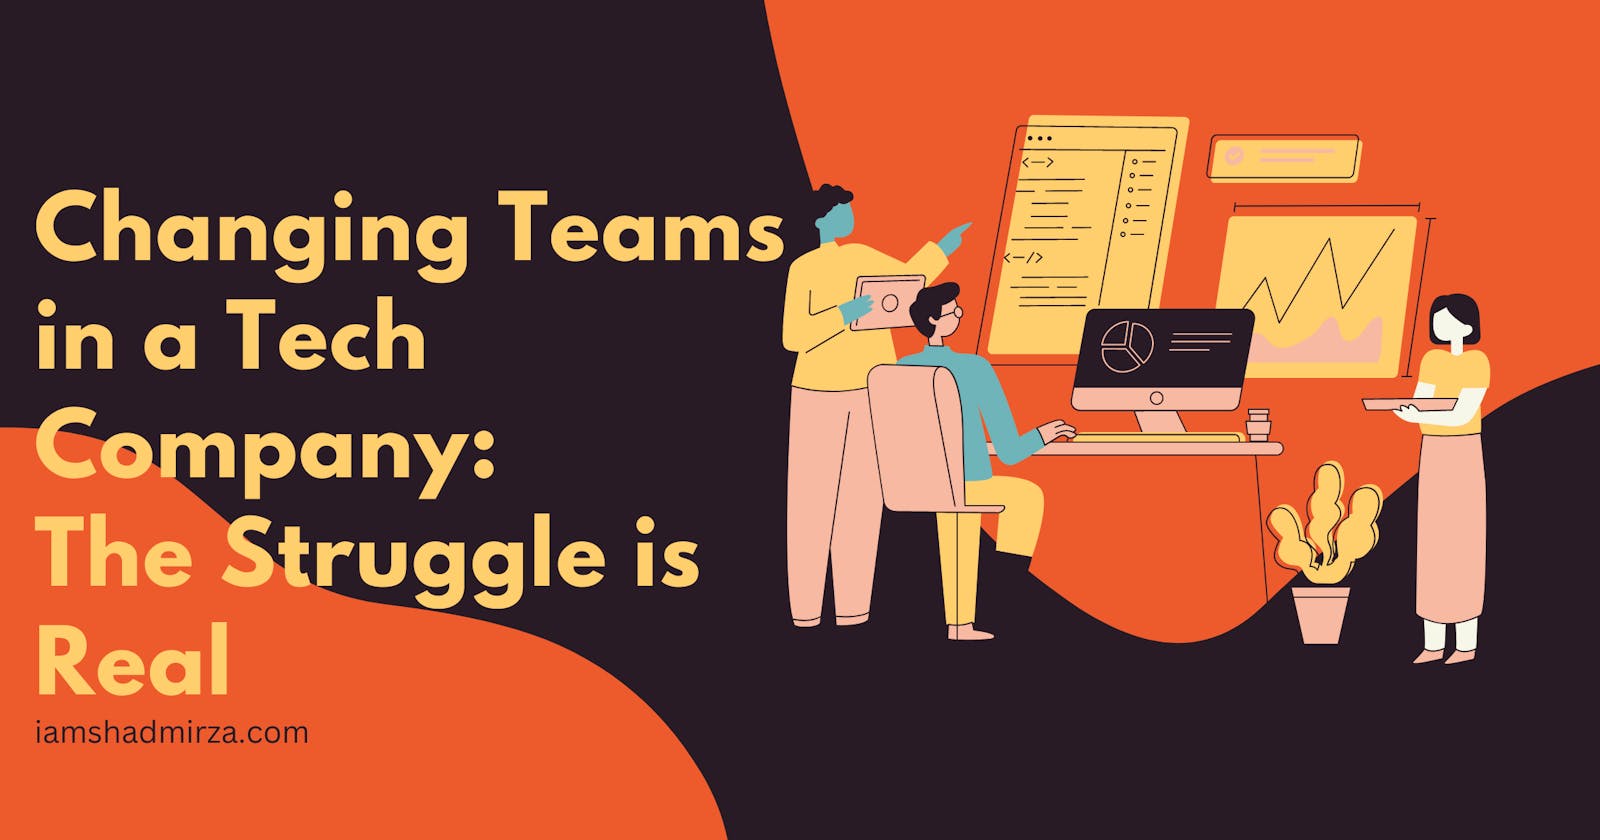 Changing Teams in a Tech Company: The Struggle is Real